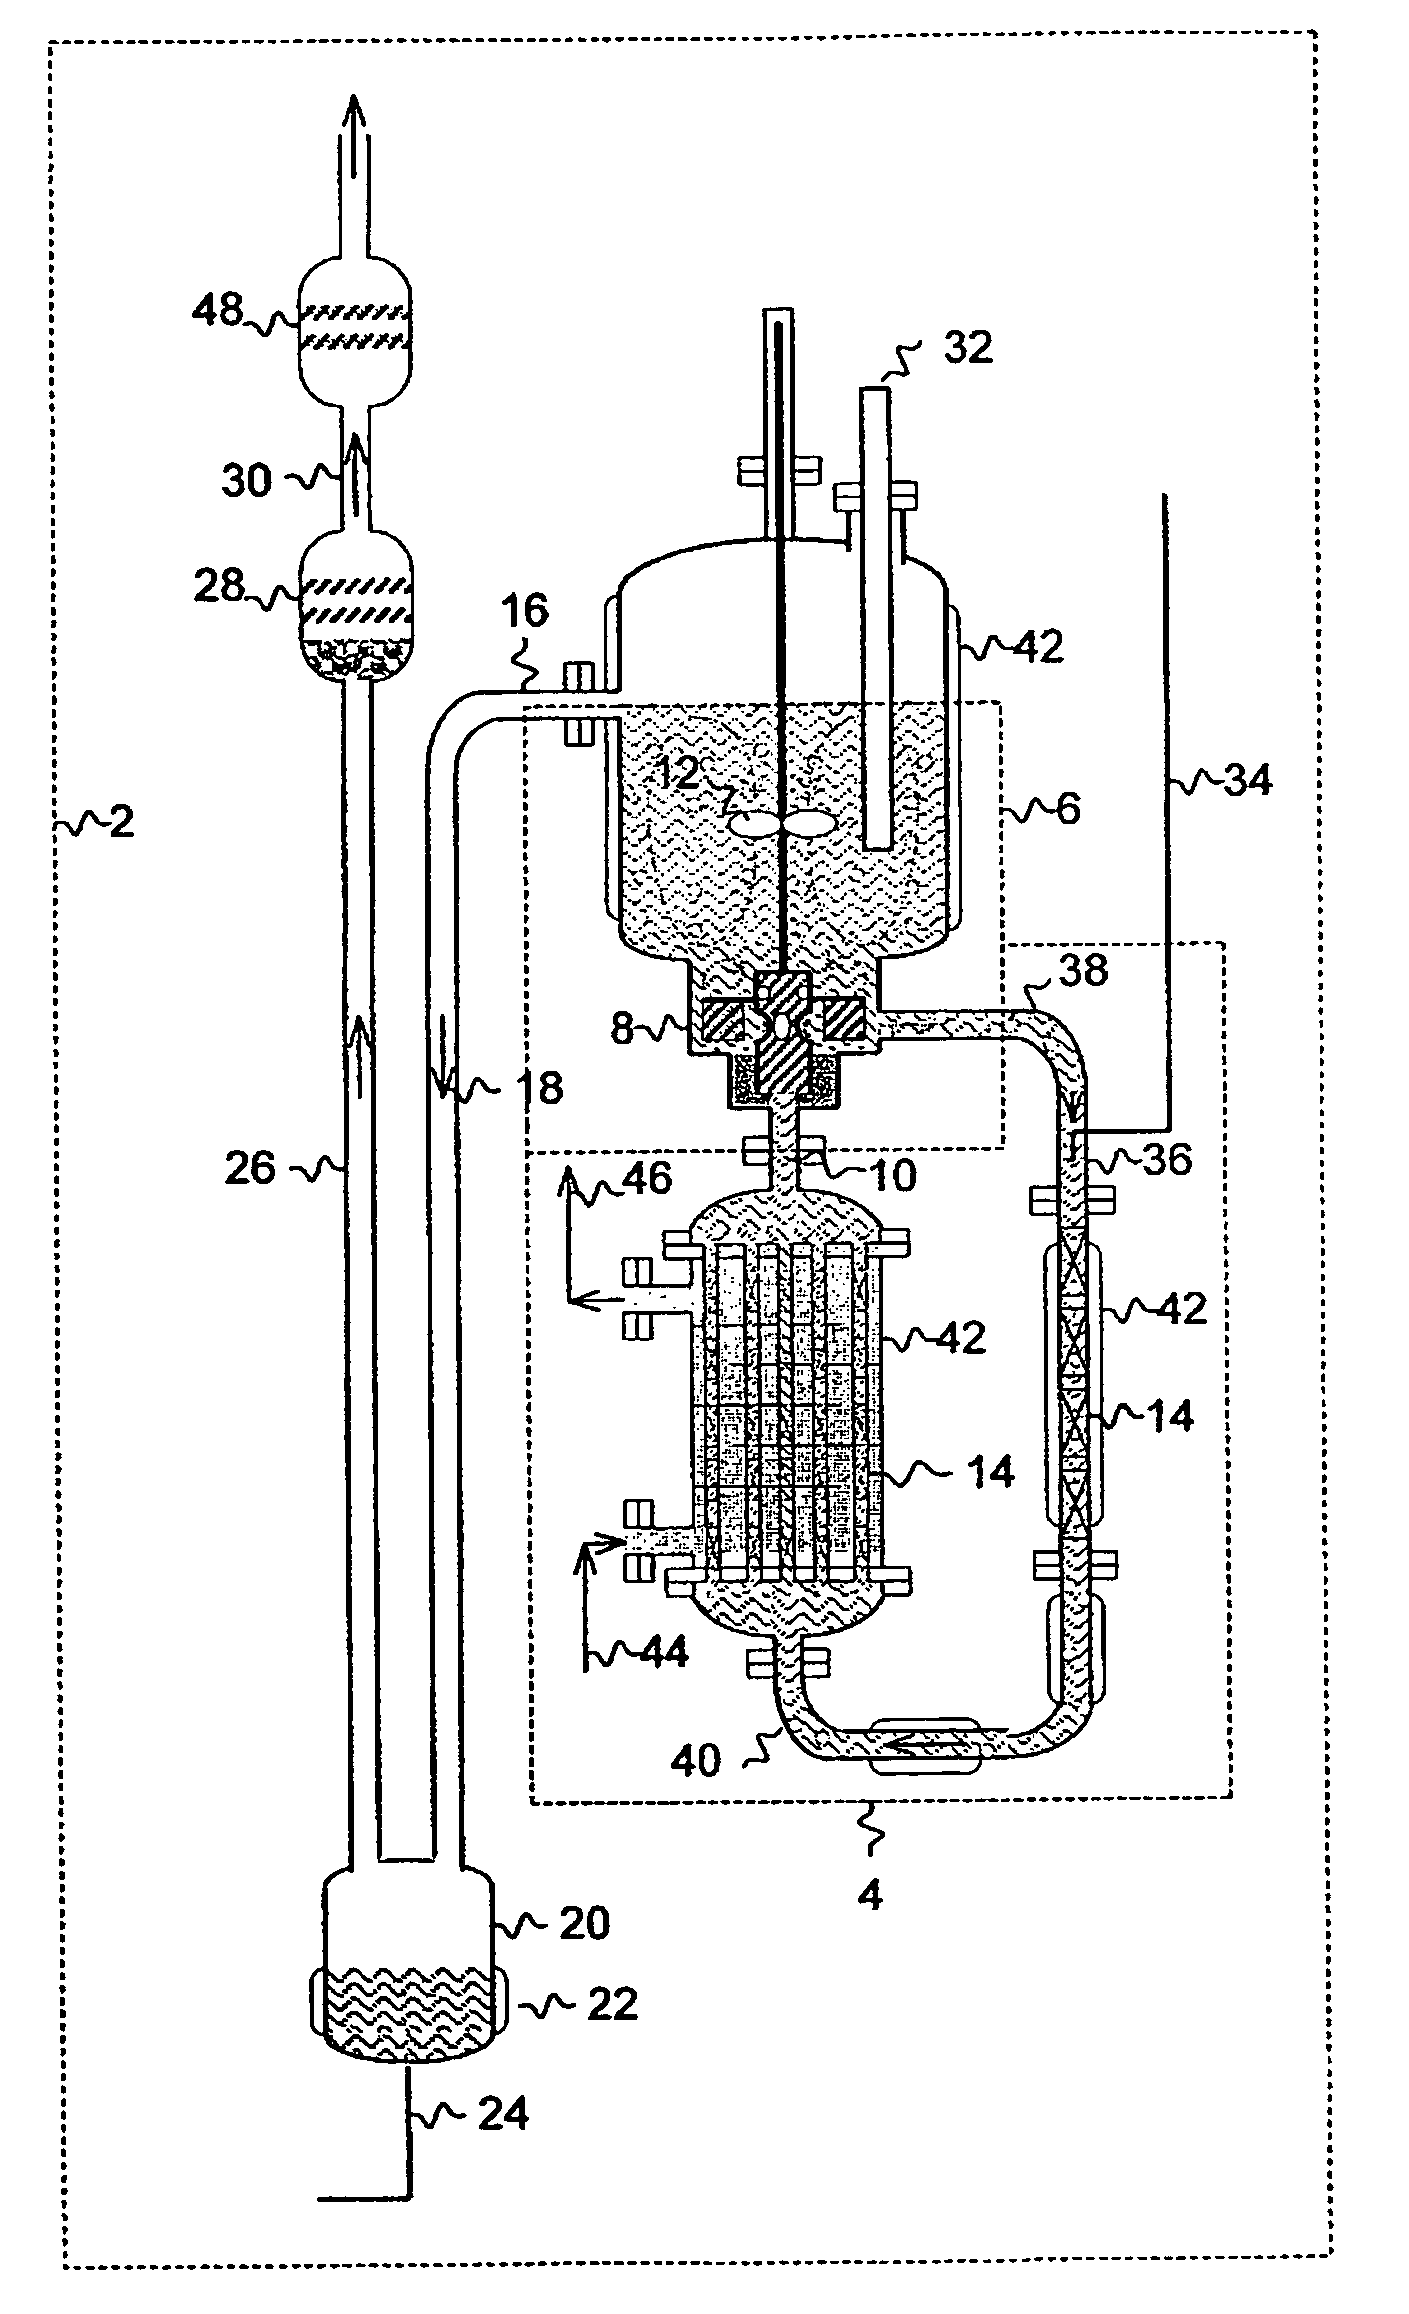 NF3 production reactor